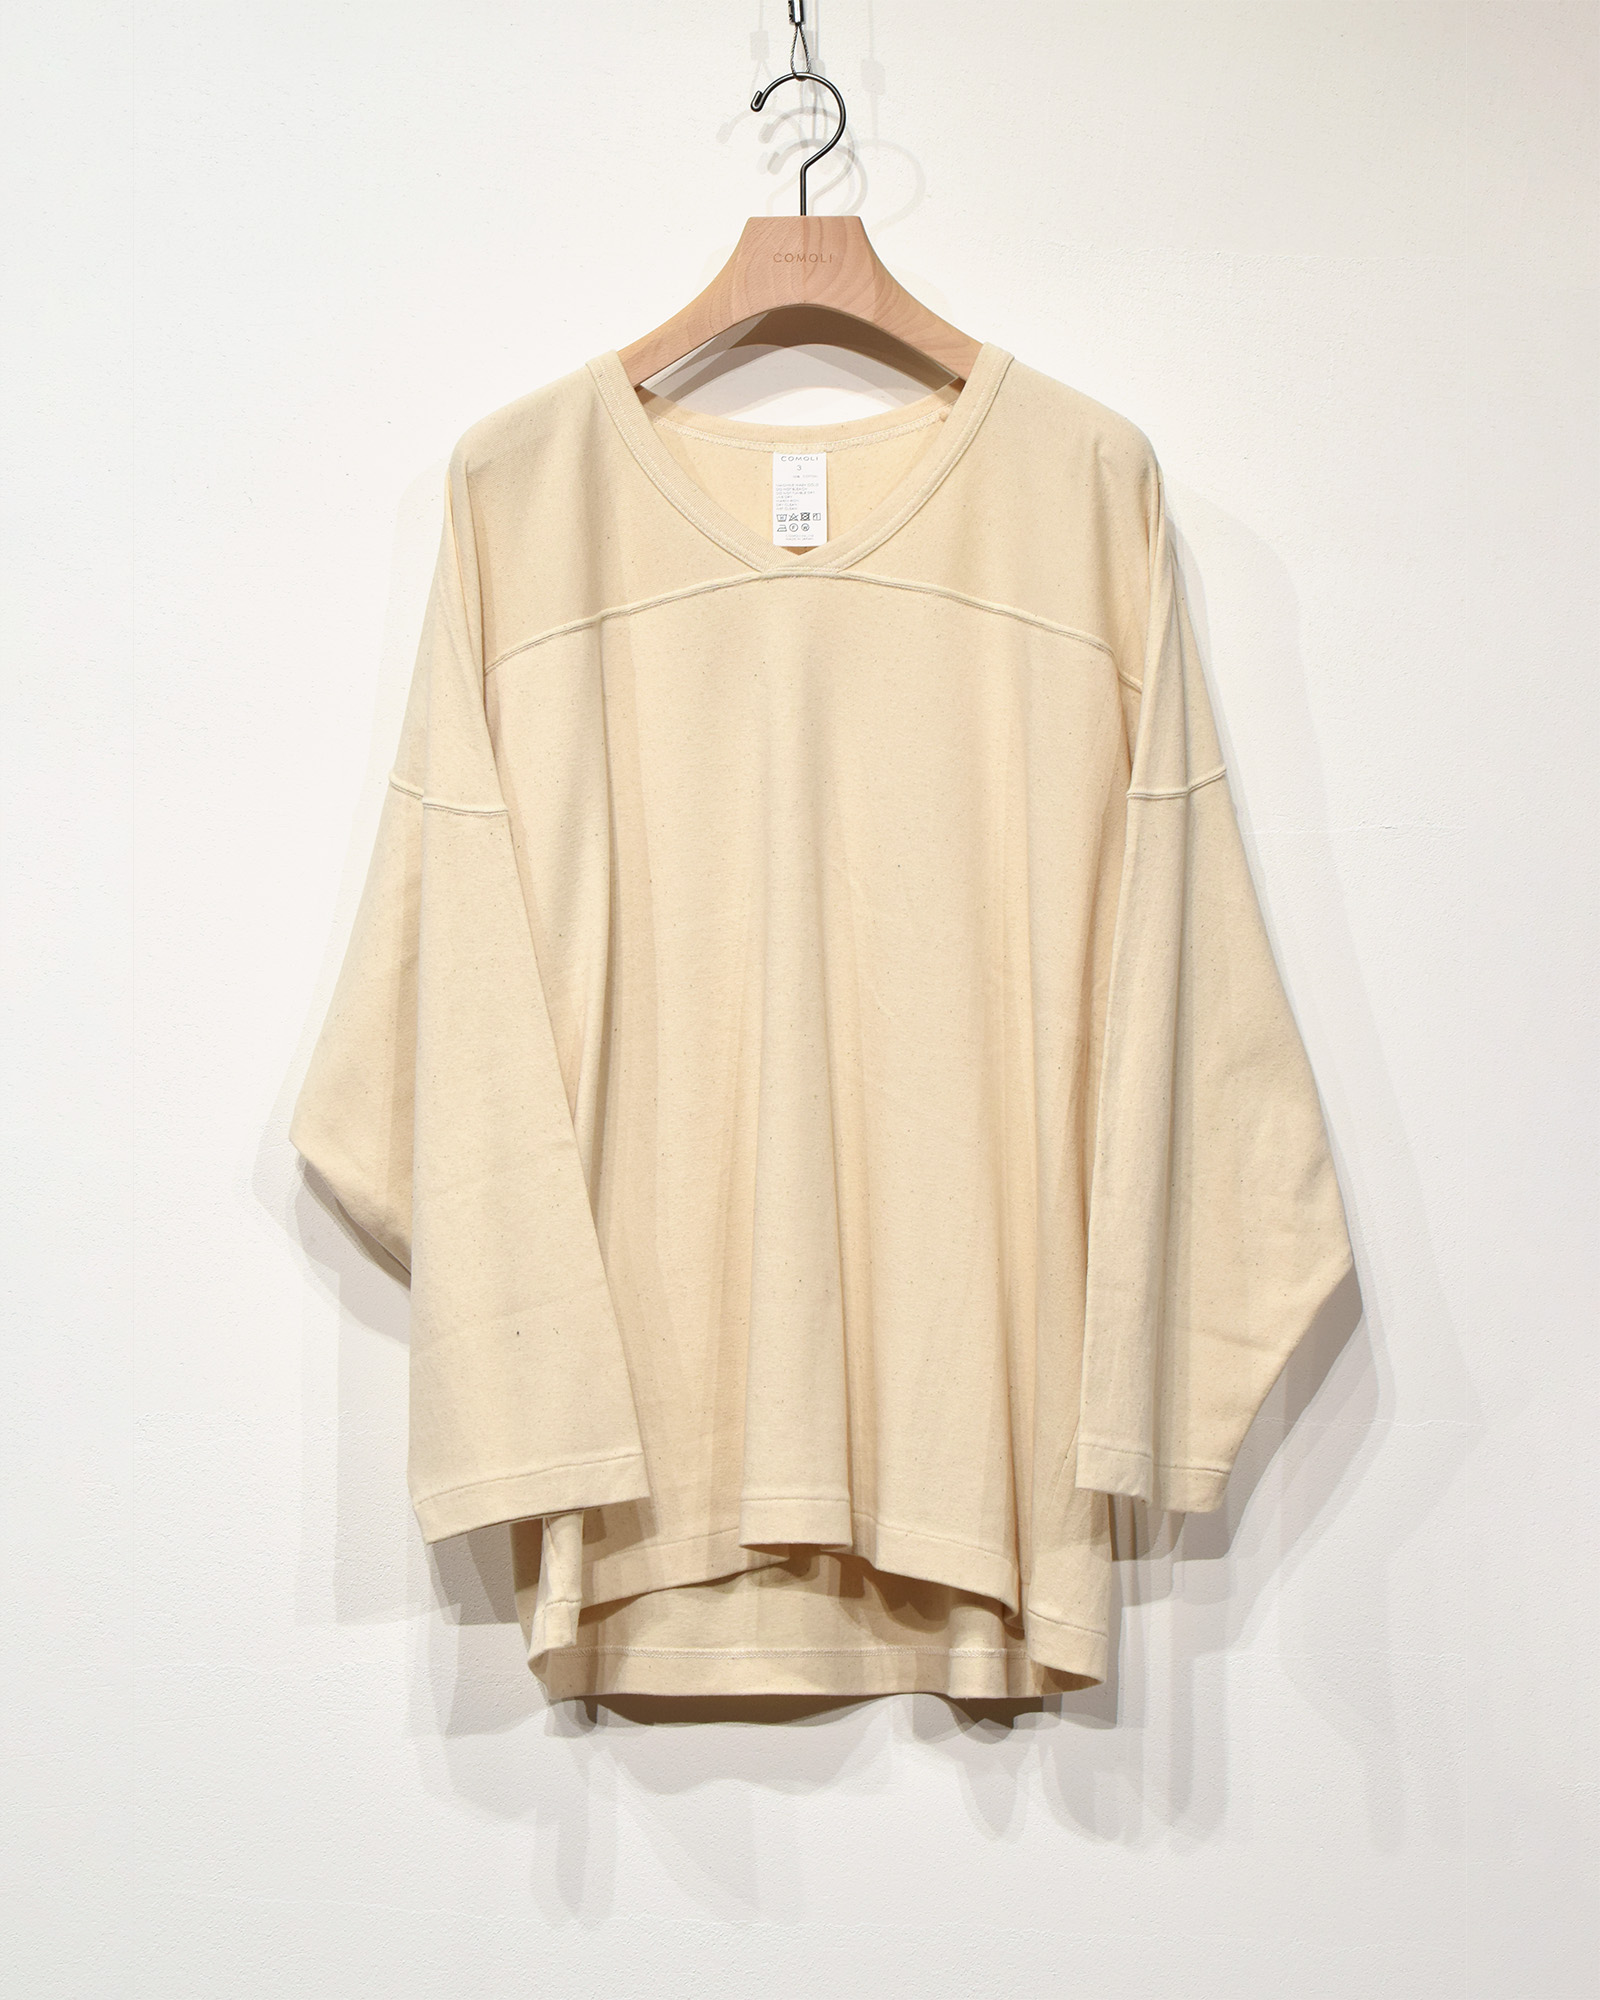 COMOLI】”SS23 COLLECTION” -7th DELIVERY- | MAIDENS SHOP 